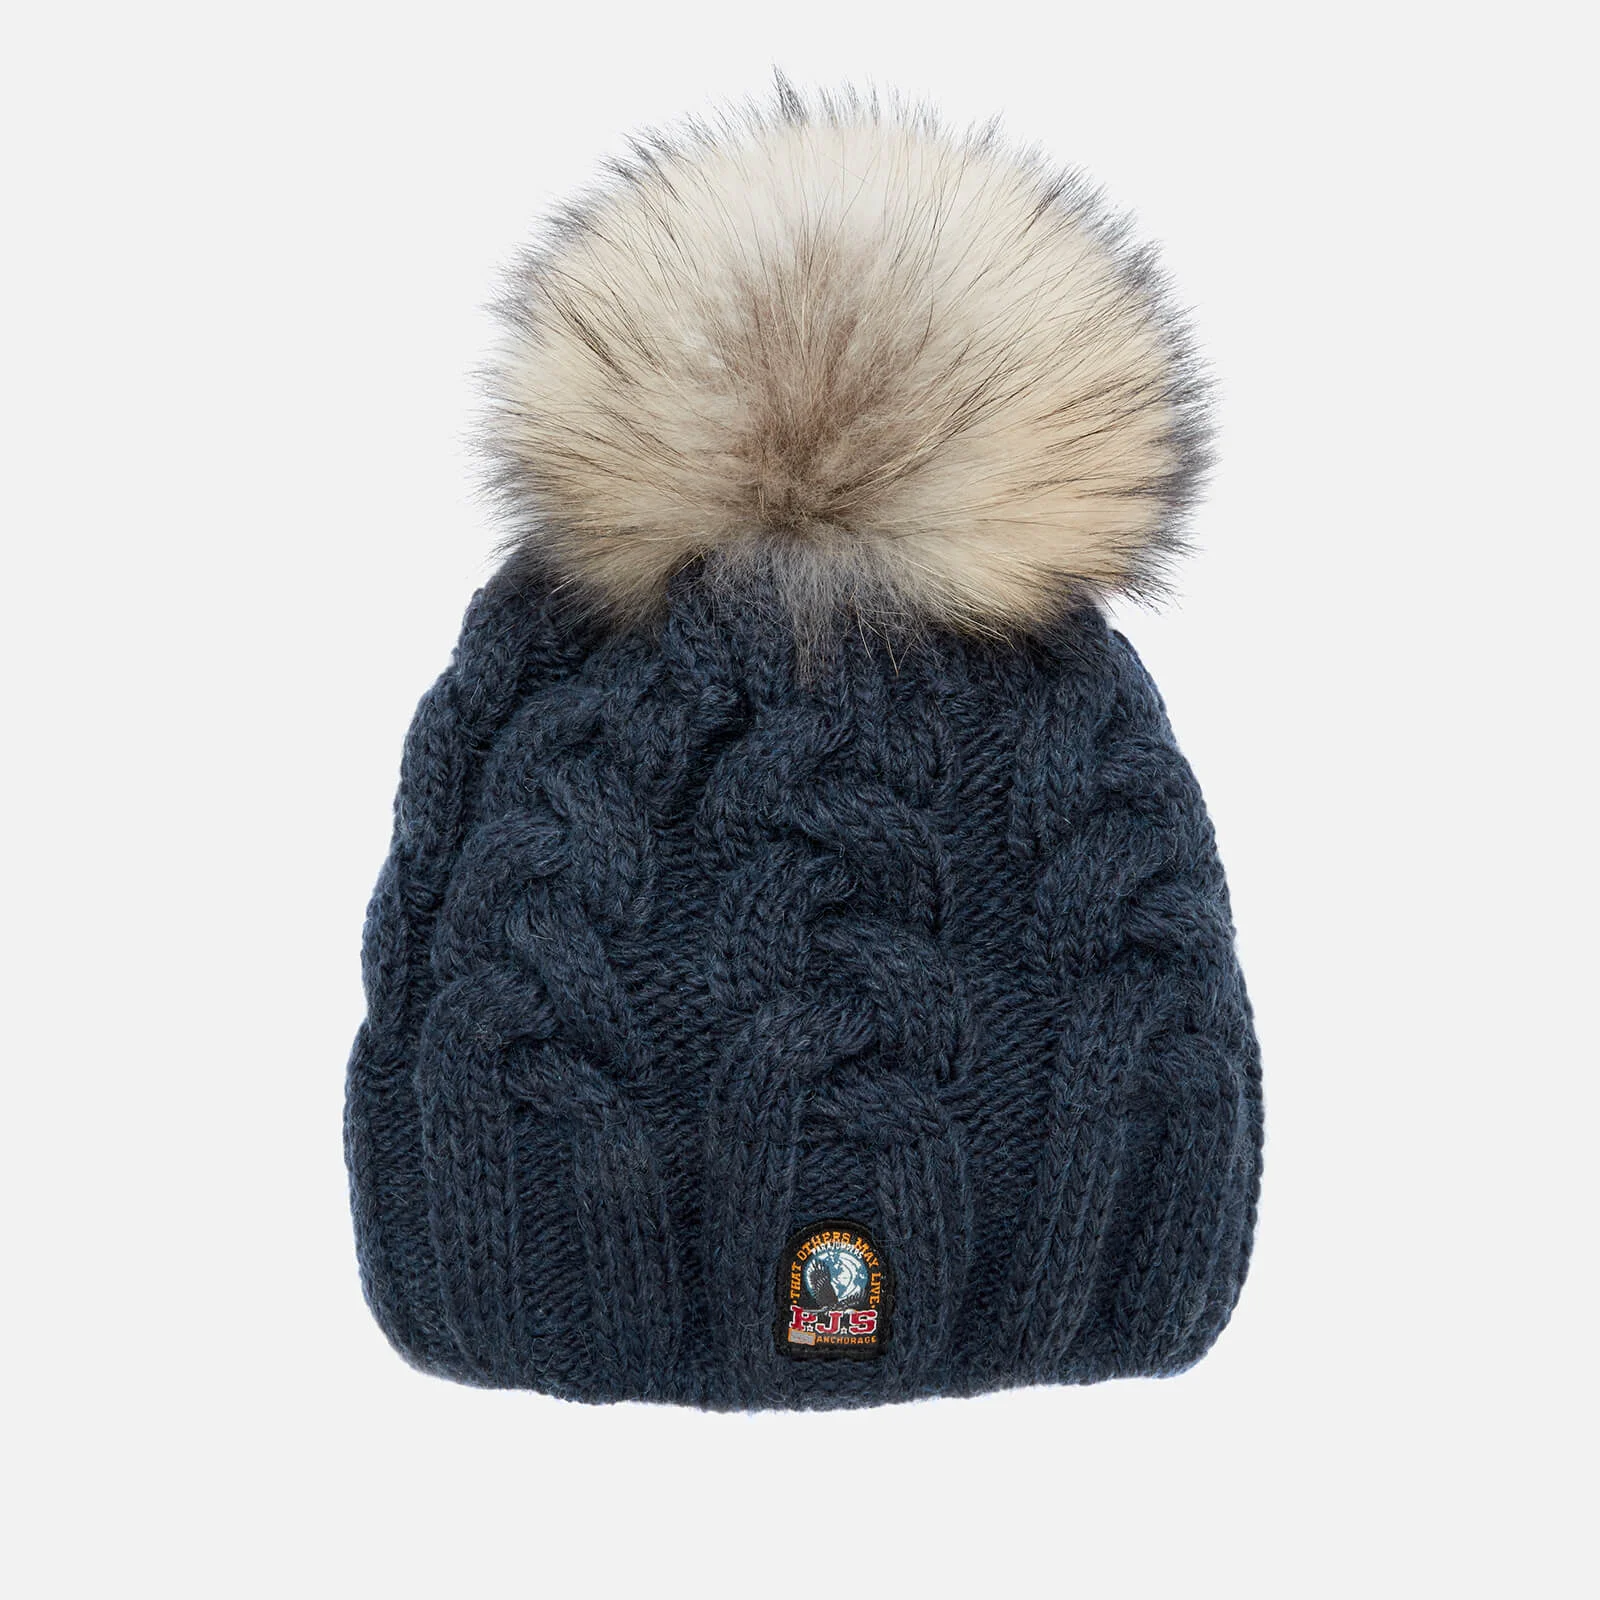 Parajumpers Women's Cable Hat - Navy Image 1